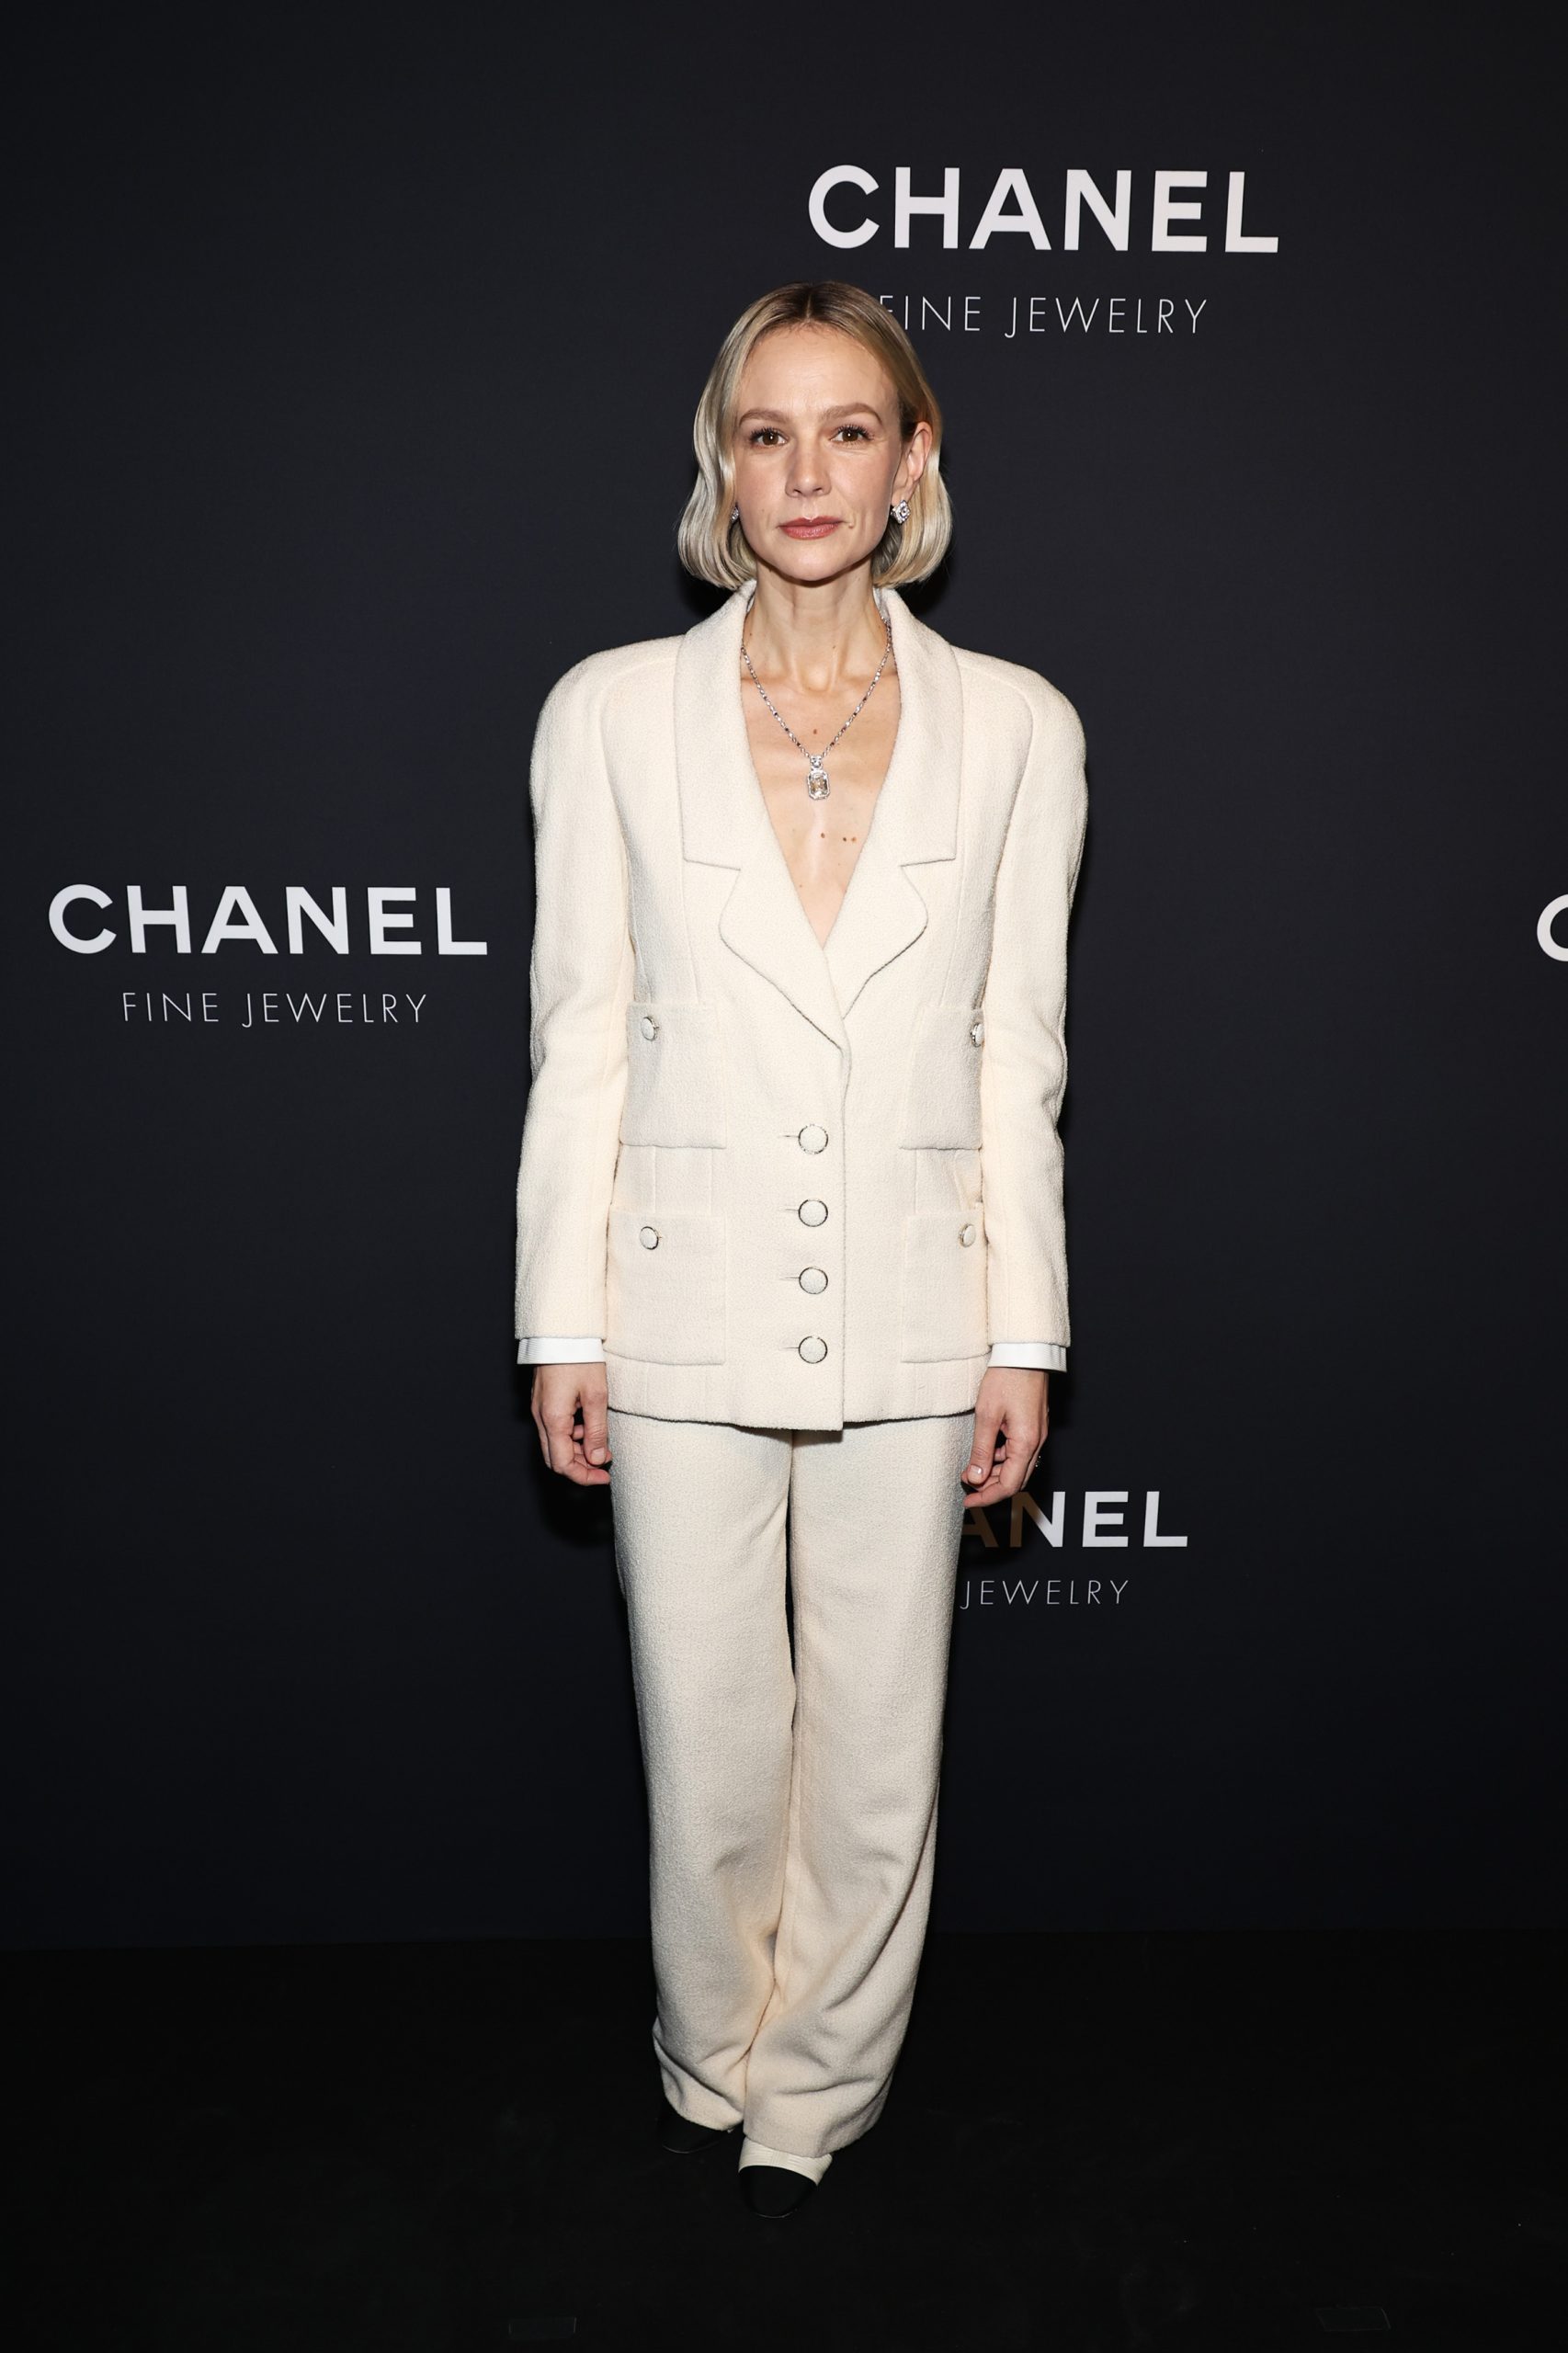 NEW YORK, NEW YORK - FEBRUARY 07: Carey Mulligan, wearing CHANEL, attends the CHANEL Dinner to celebrate the Watches & Fine Jewelry Fifth Avenue Flagship Boutique Opening on February 07, 2024 in New York City. (Photo by Jamie McCarthy/WireImage)